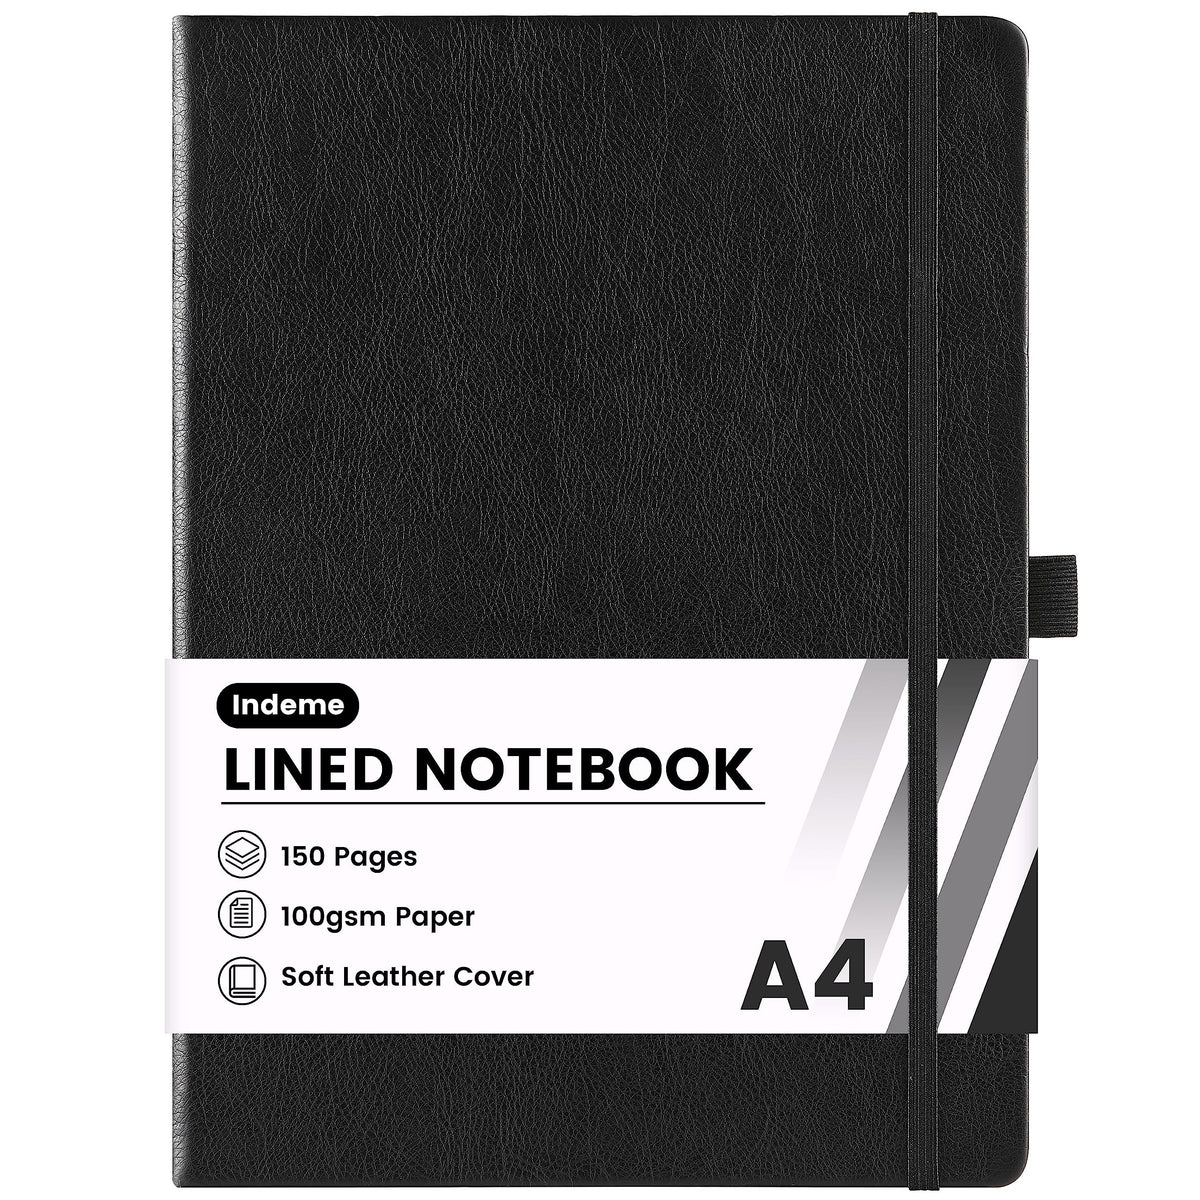 Indeme Notebook A4, Lined Notebook with 144 Pages Premium Paper, Hardcover, 8.35 inches X 11.45 inches, Black